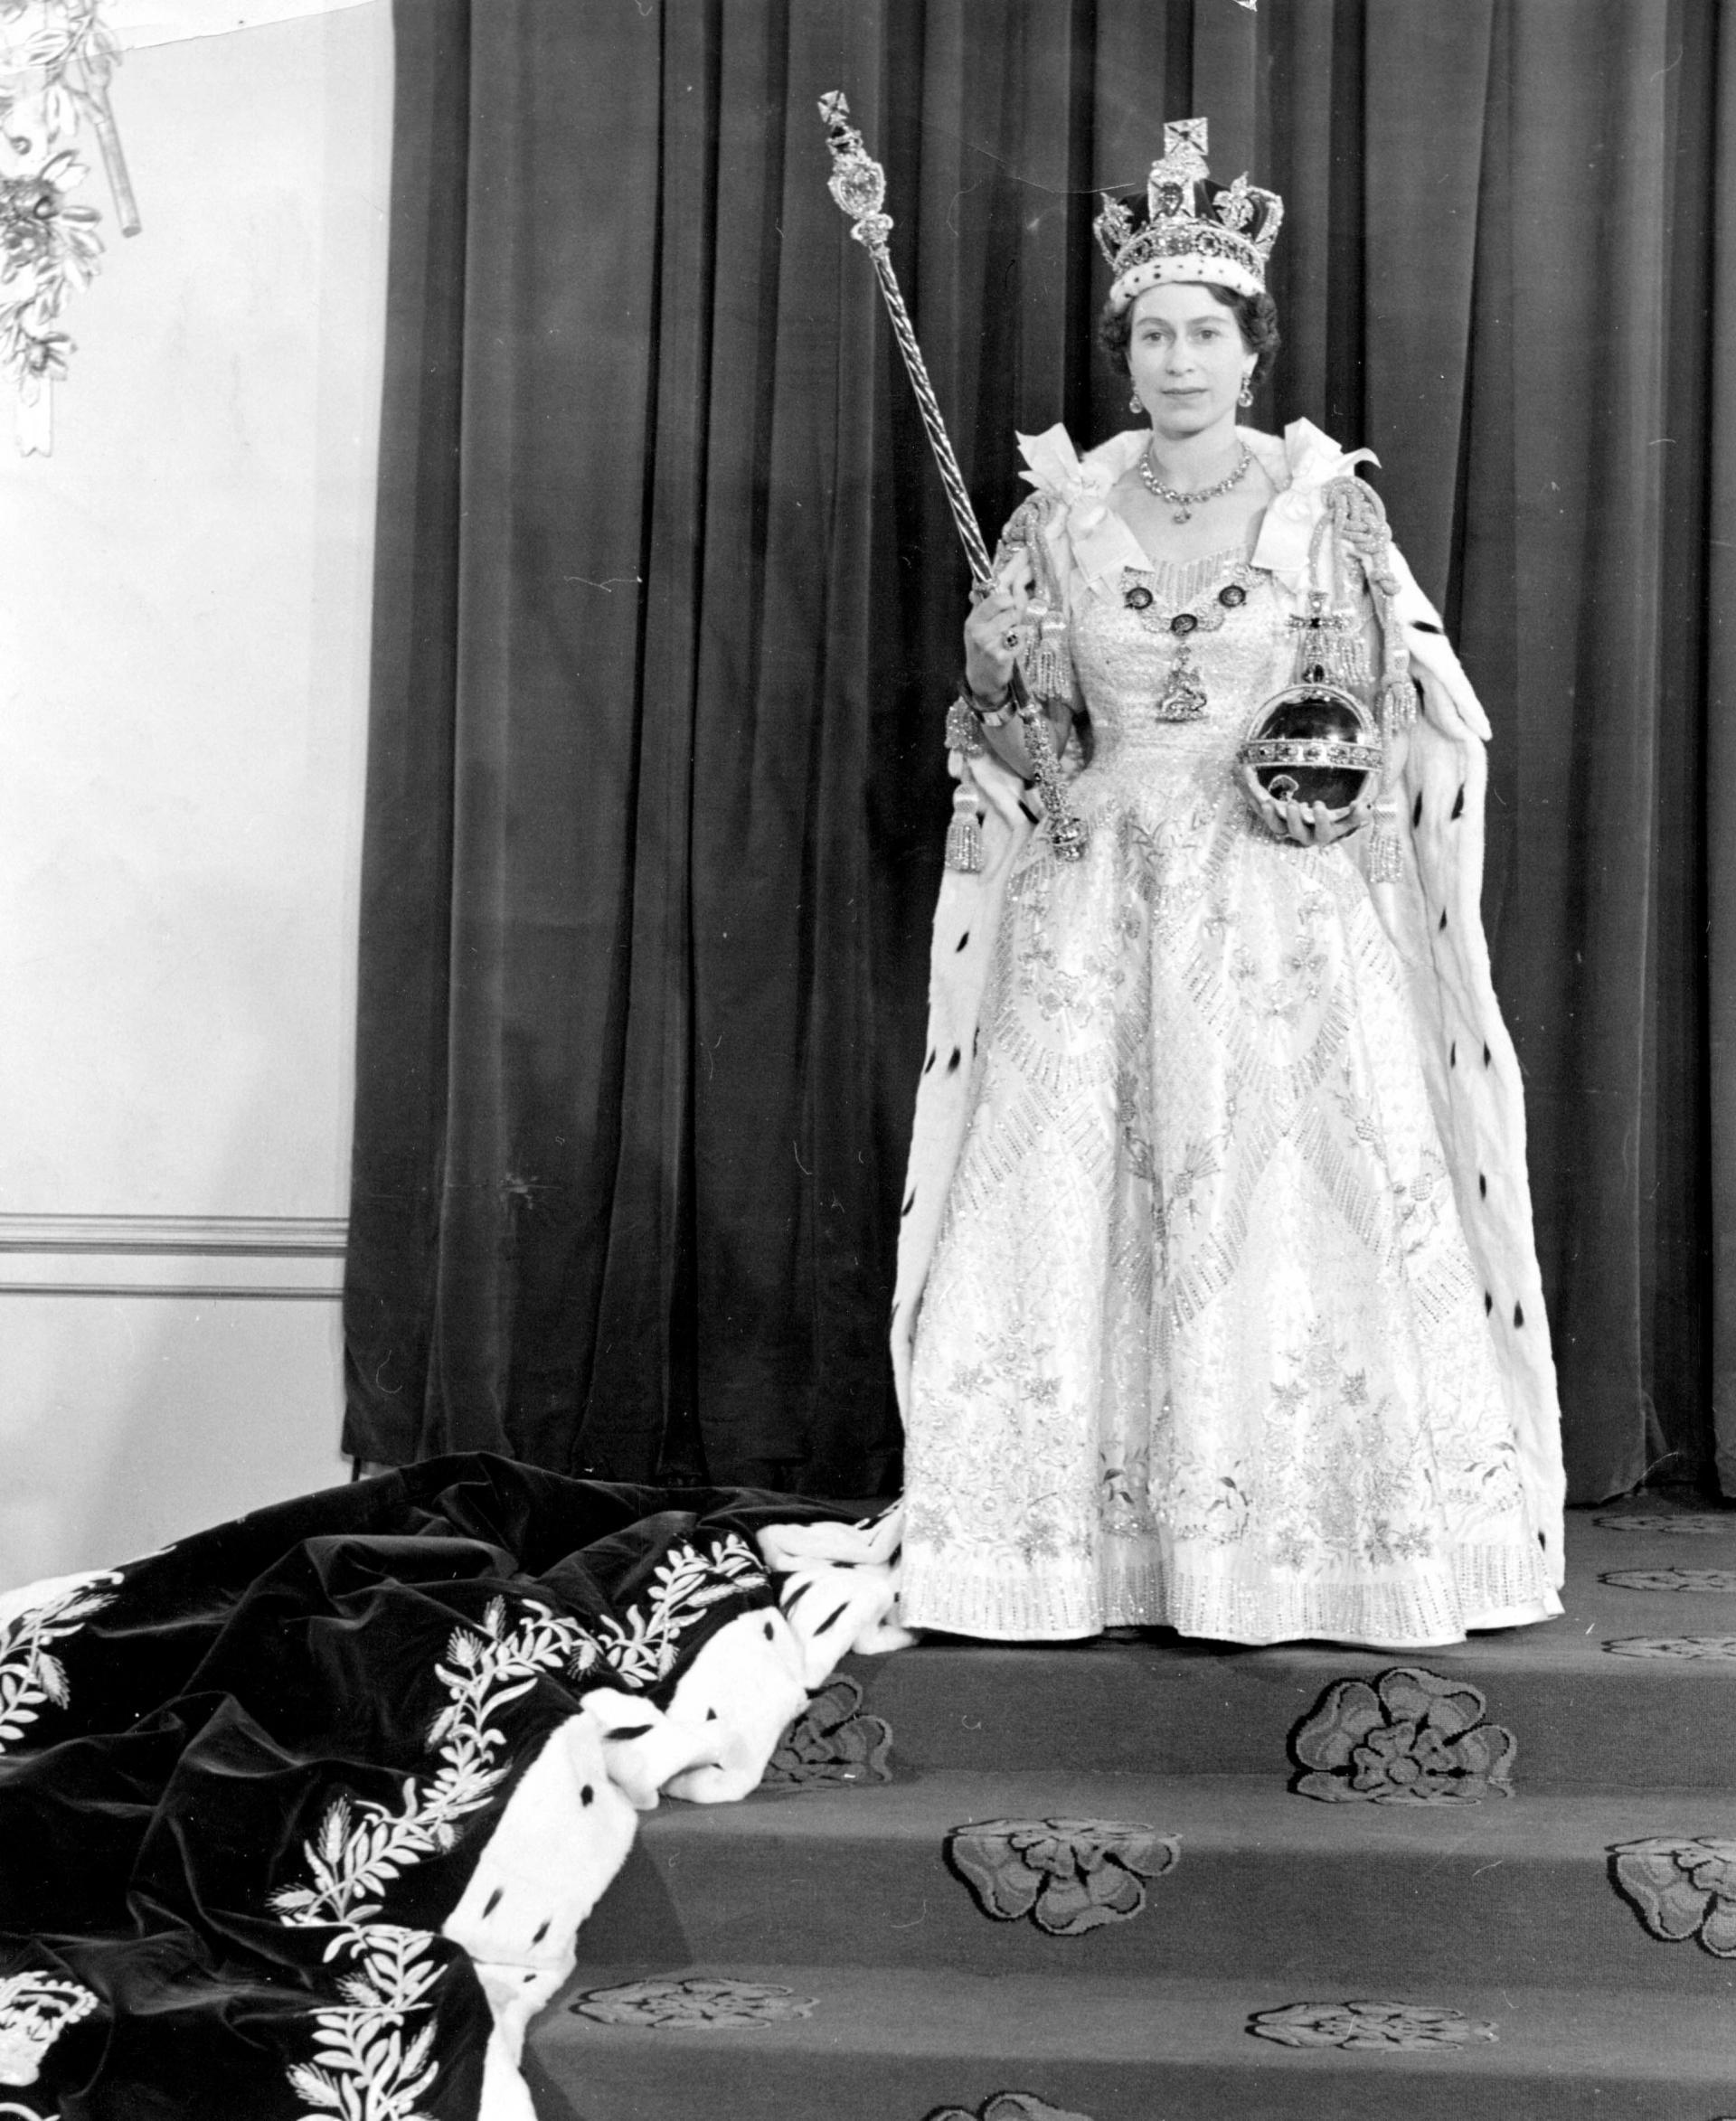 The Queens Coronation in 1952 - which can be viewed searched for on the website. 